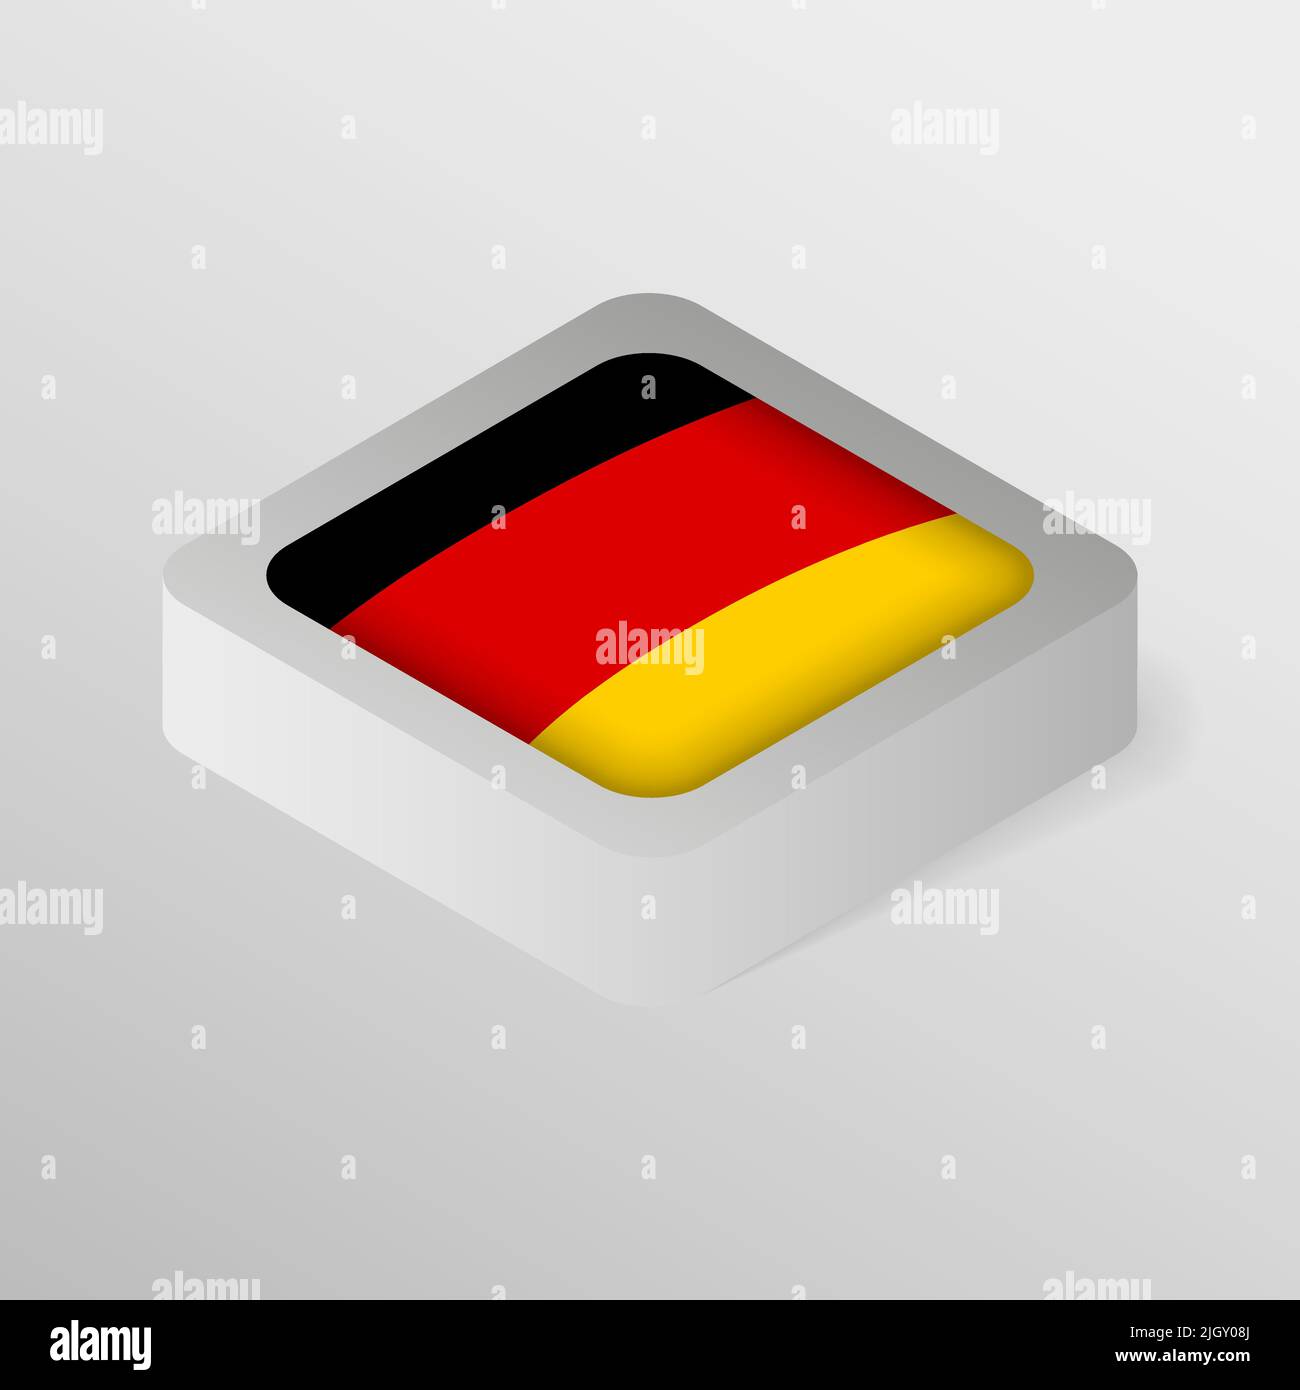 EPS10 Vector Patriotic shield with flag of Germany. An element of impact for the use you want to make of it. Stock Vector